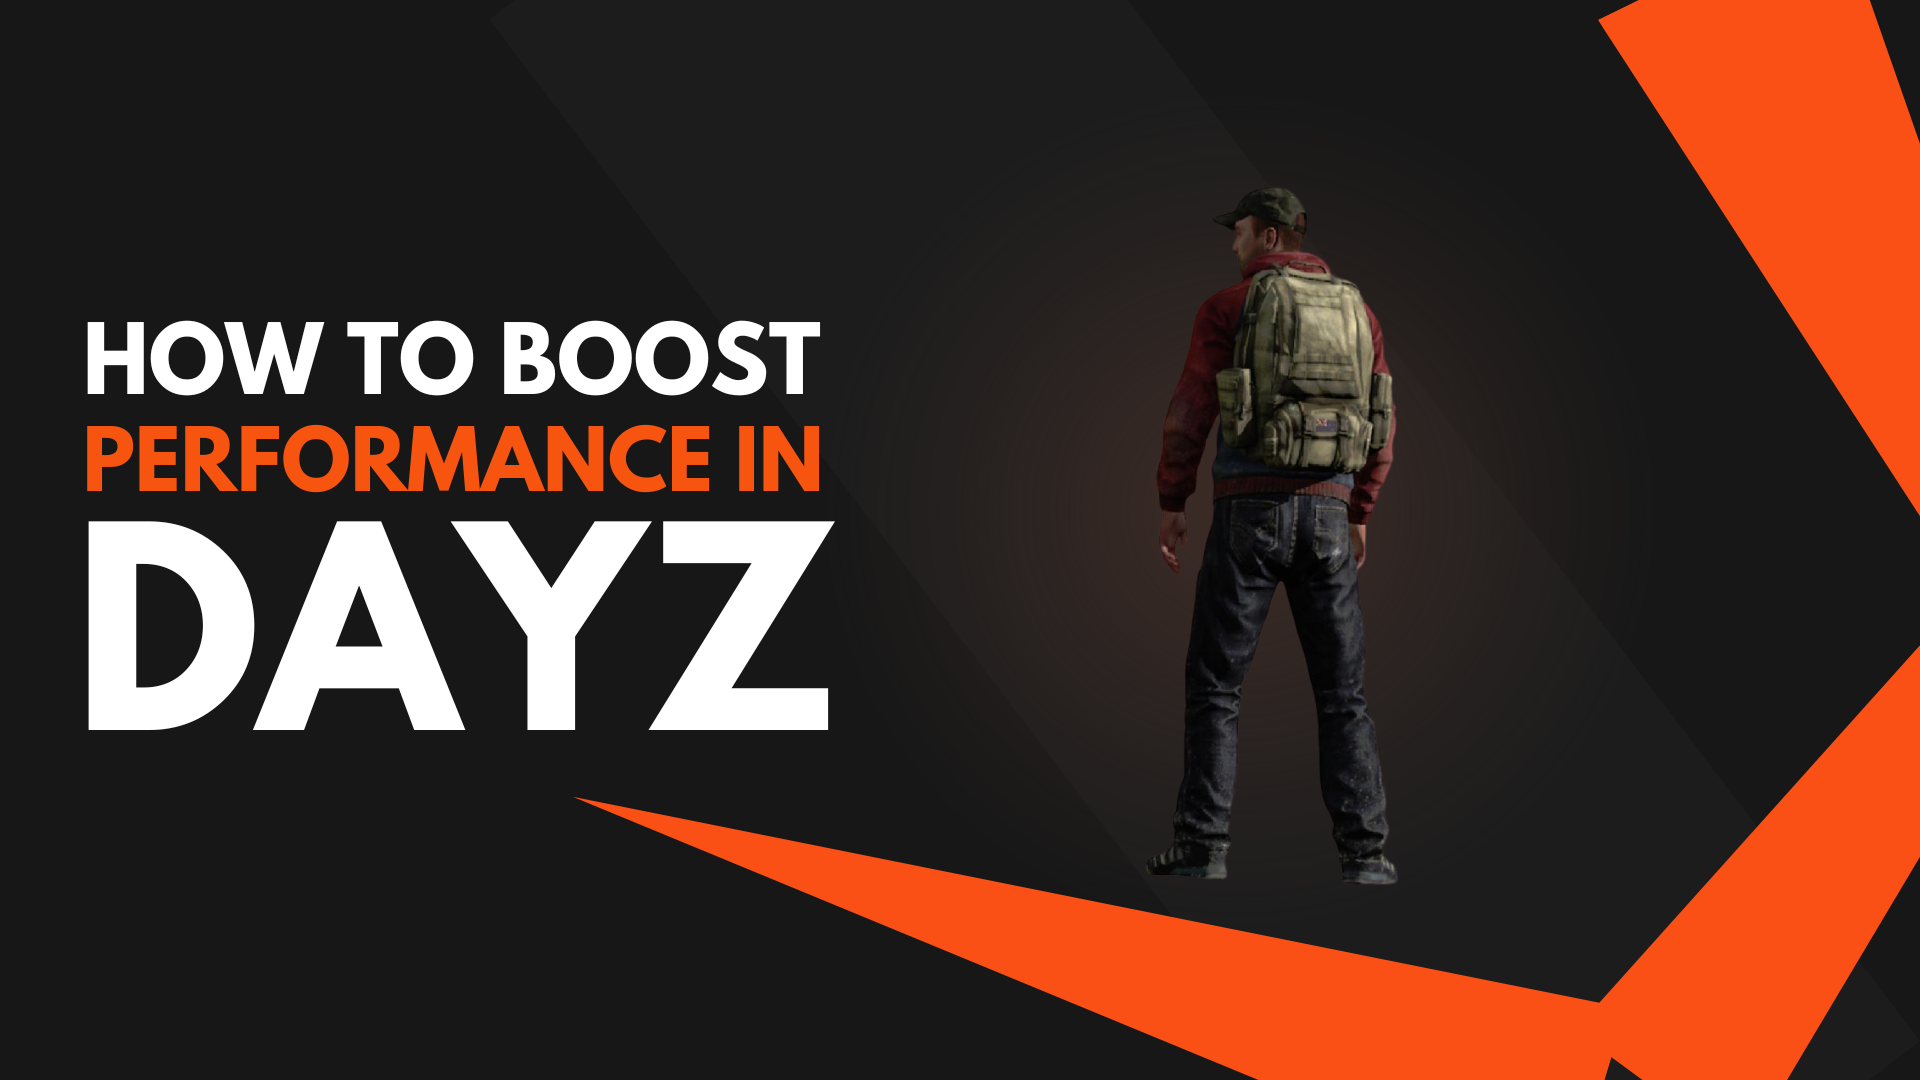 how to boost performance in dayz for casual gamers